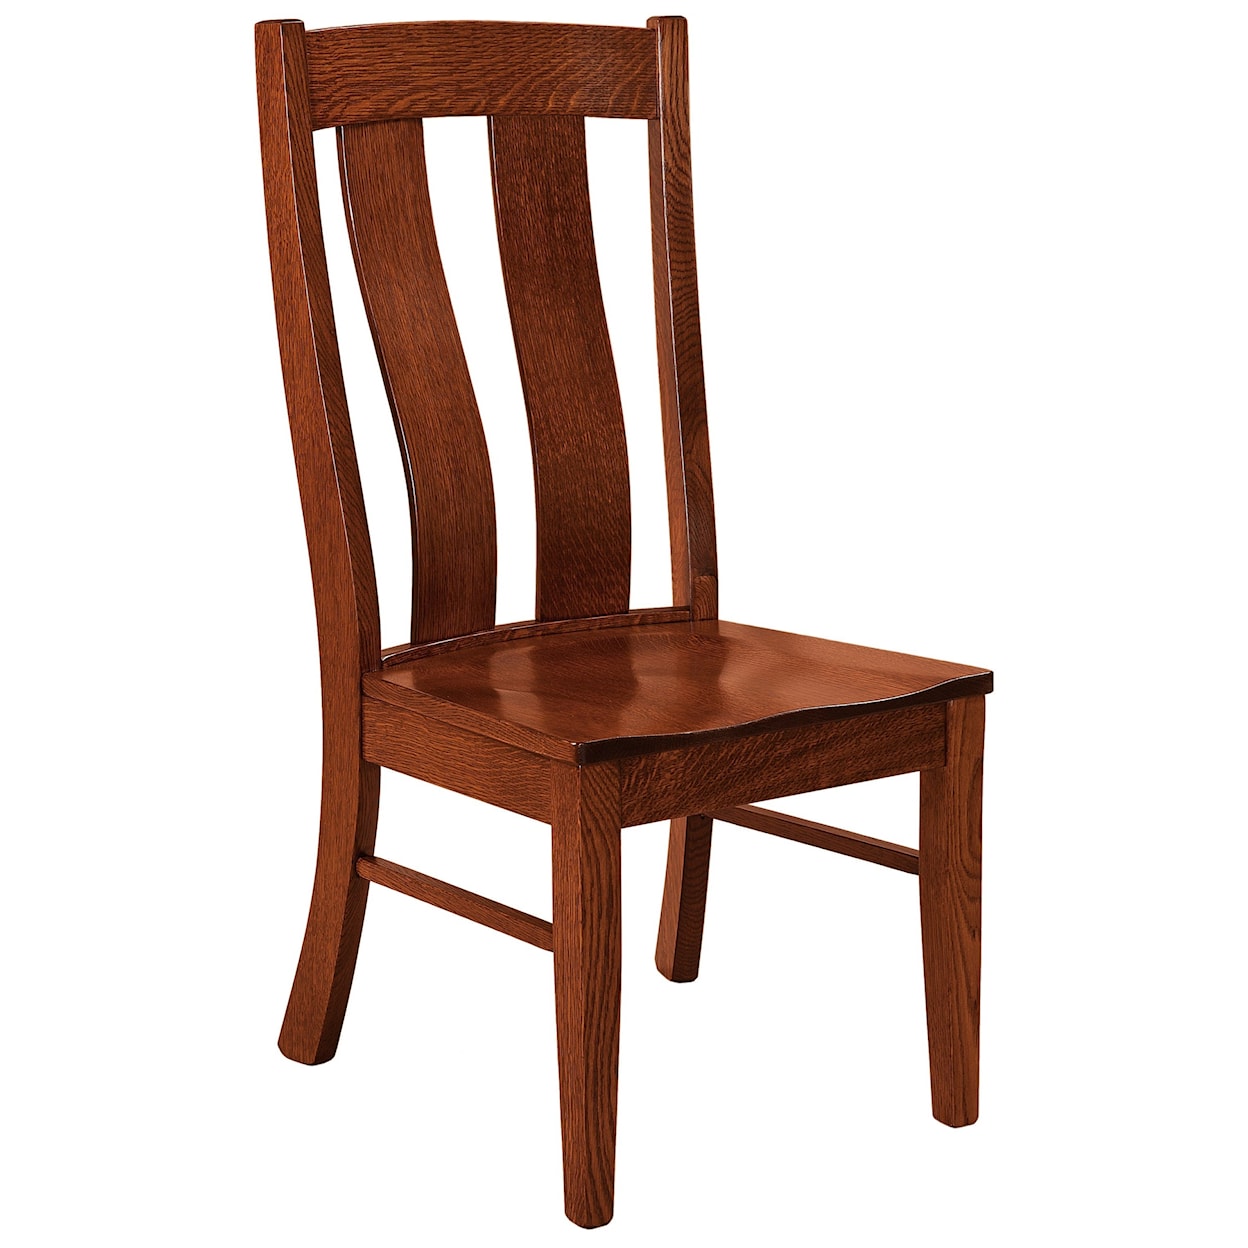 F&N Woodworking Laurie Side Chair - Leather Seat